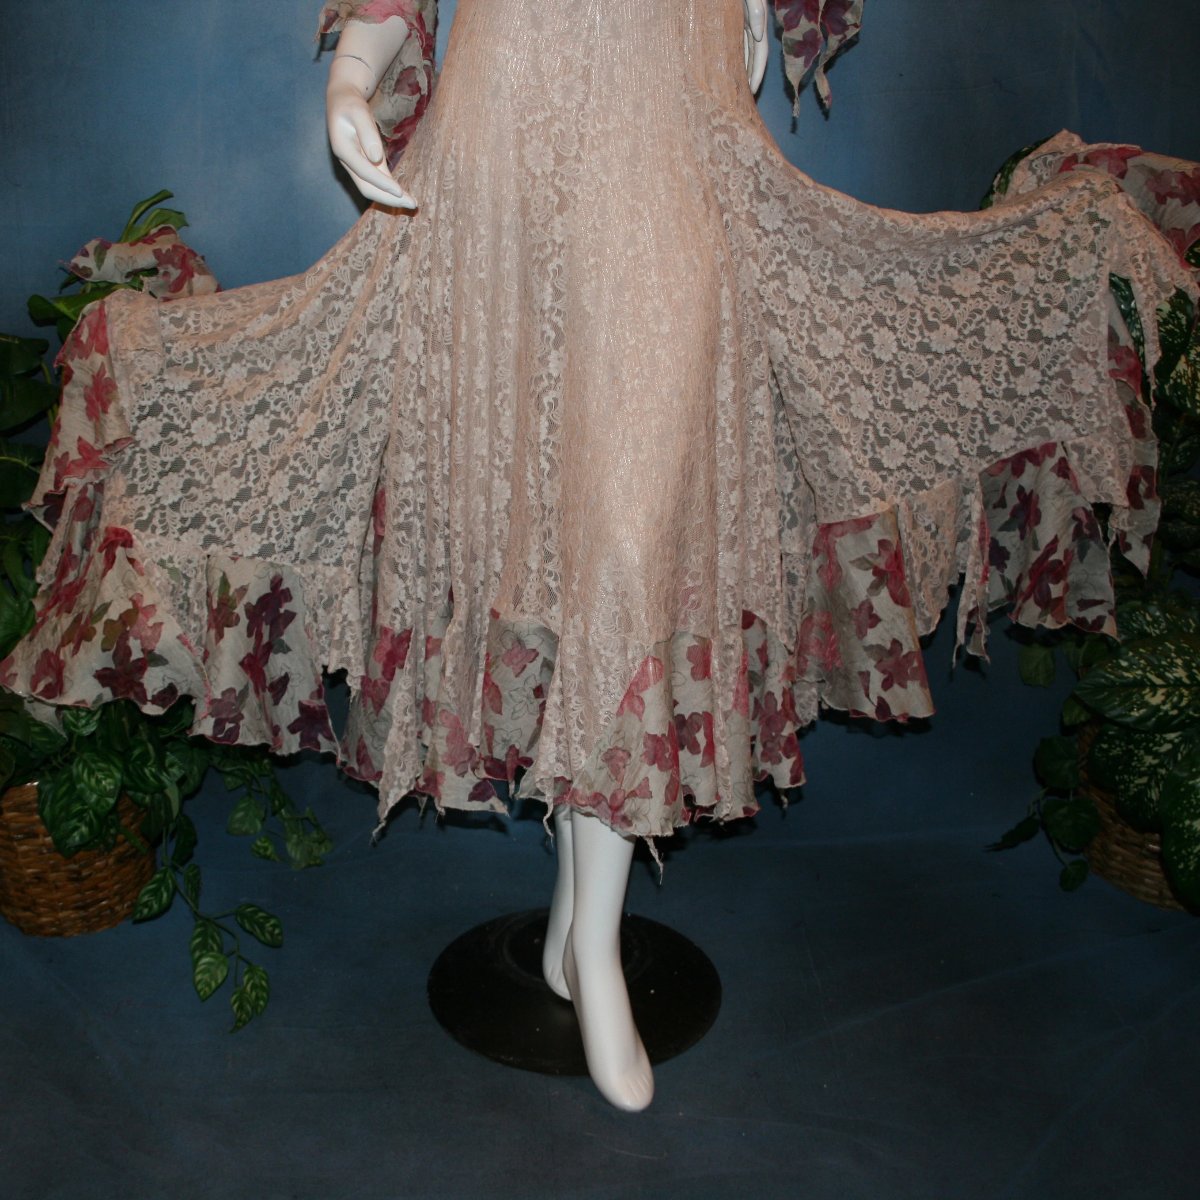 lower view of Soft beige social ballroom dress created of beige stretch lace with oodles of beige & pink flower print semi-sheer flounces, a touch of pink silk flowers with beading, & under slip dress. A great beginner ballroom dance show dress!